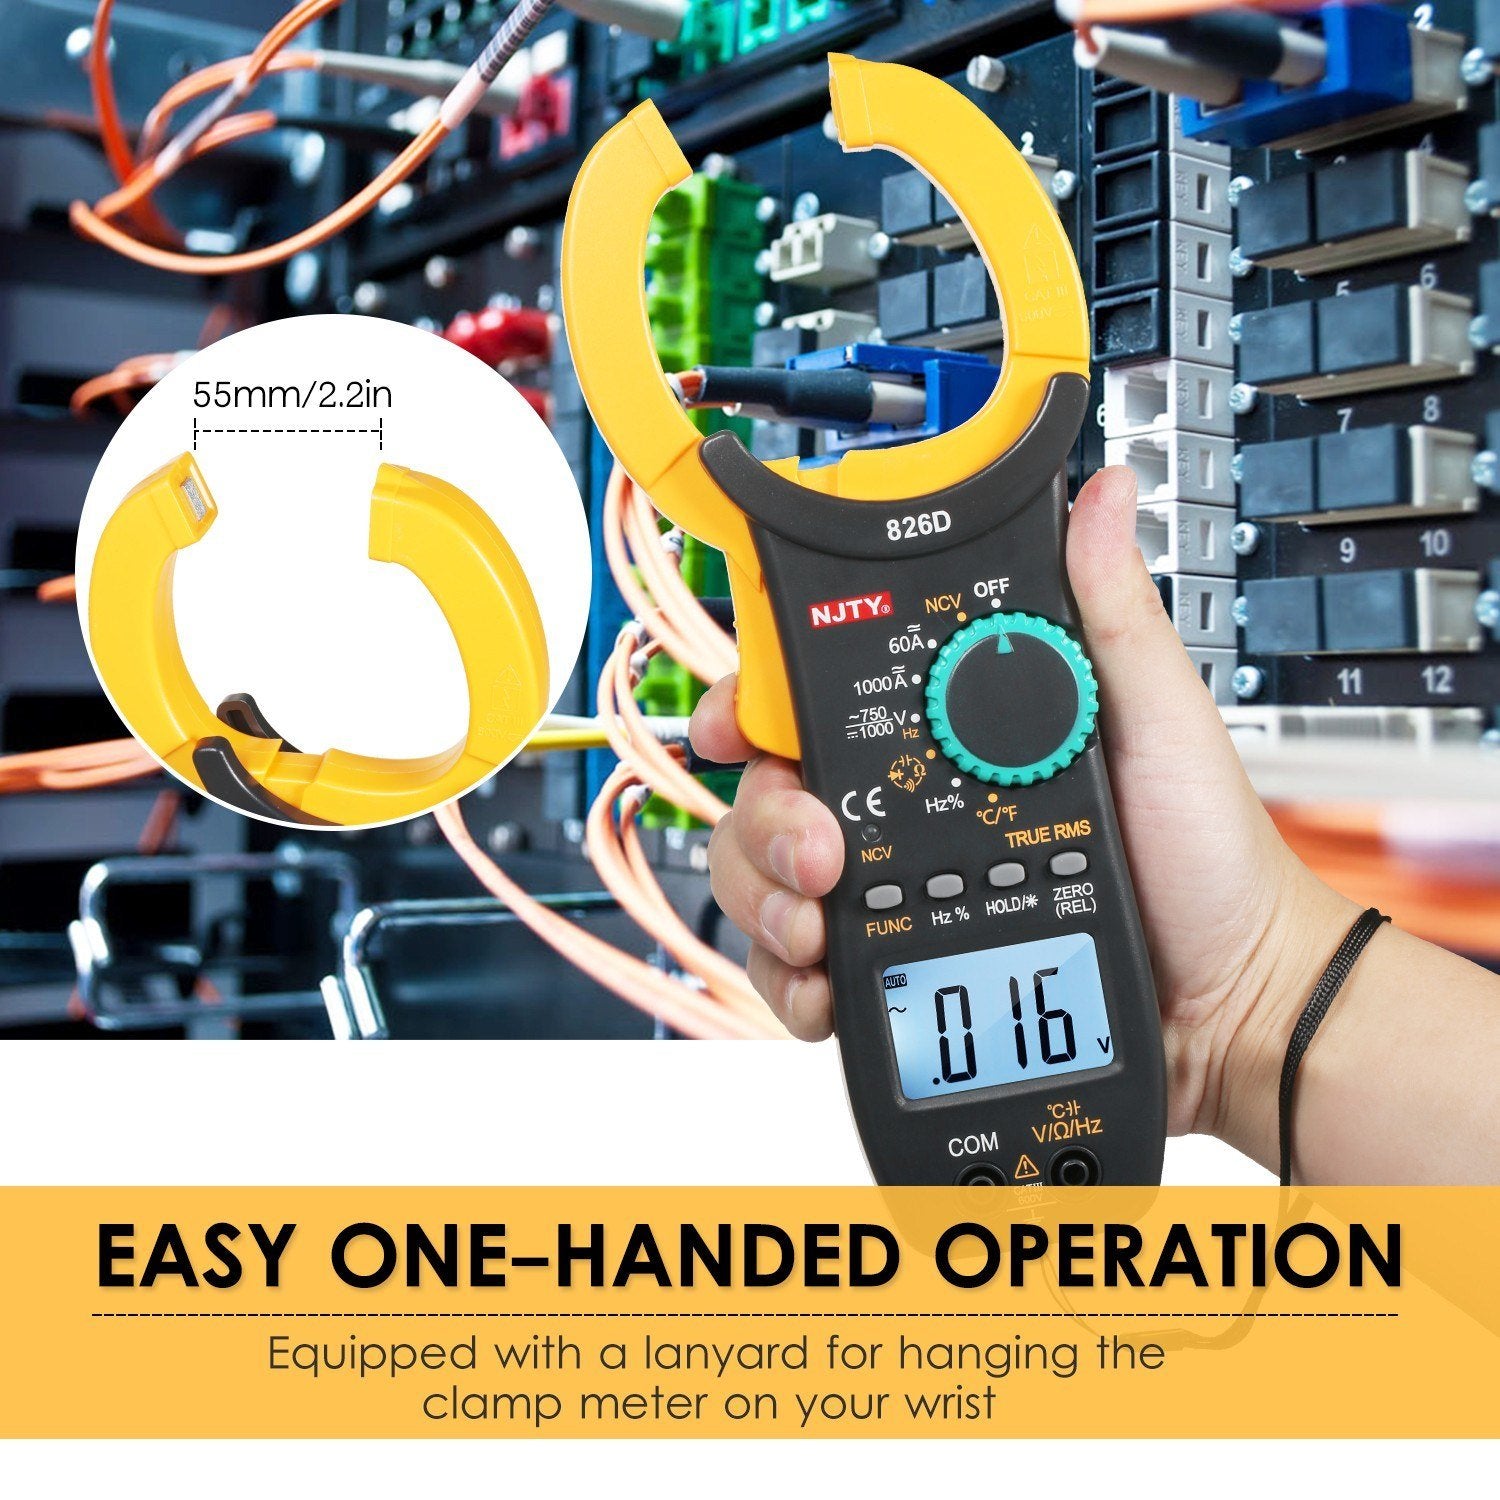 1000A AC Clamp Meter Auto Range 6000 Counts 1.9-inch LCD Digital True RMS NCV Type Universal